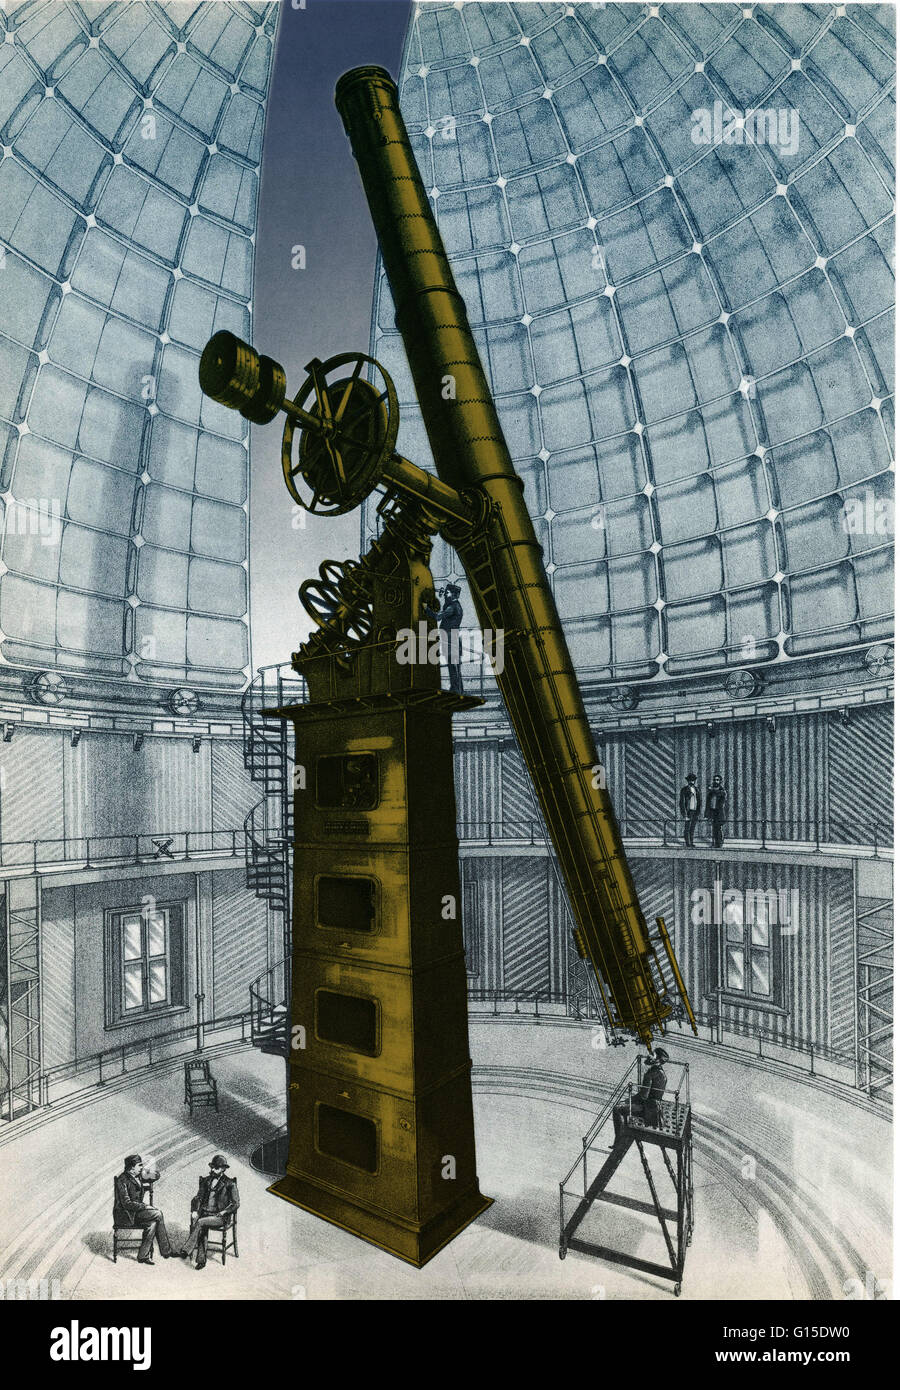 Telescope at the Lick Observatory, Mount Hamilton in California, USA. This 36 inch refractor telescope (also known as the Great Lick Refractor) was built at the same time as the Lick Observatory, between 1880 and 1888. 36 inches refers to the diameter of Stock Photo